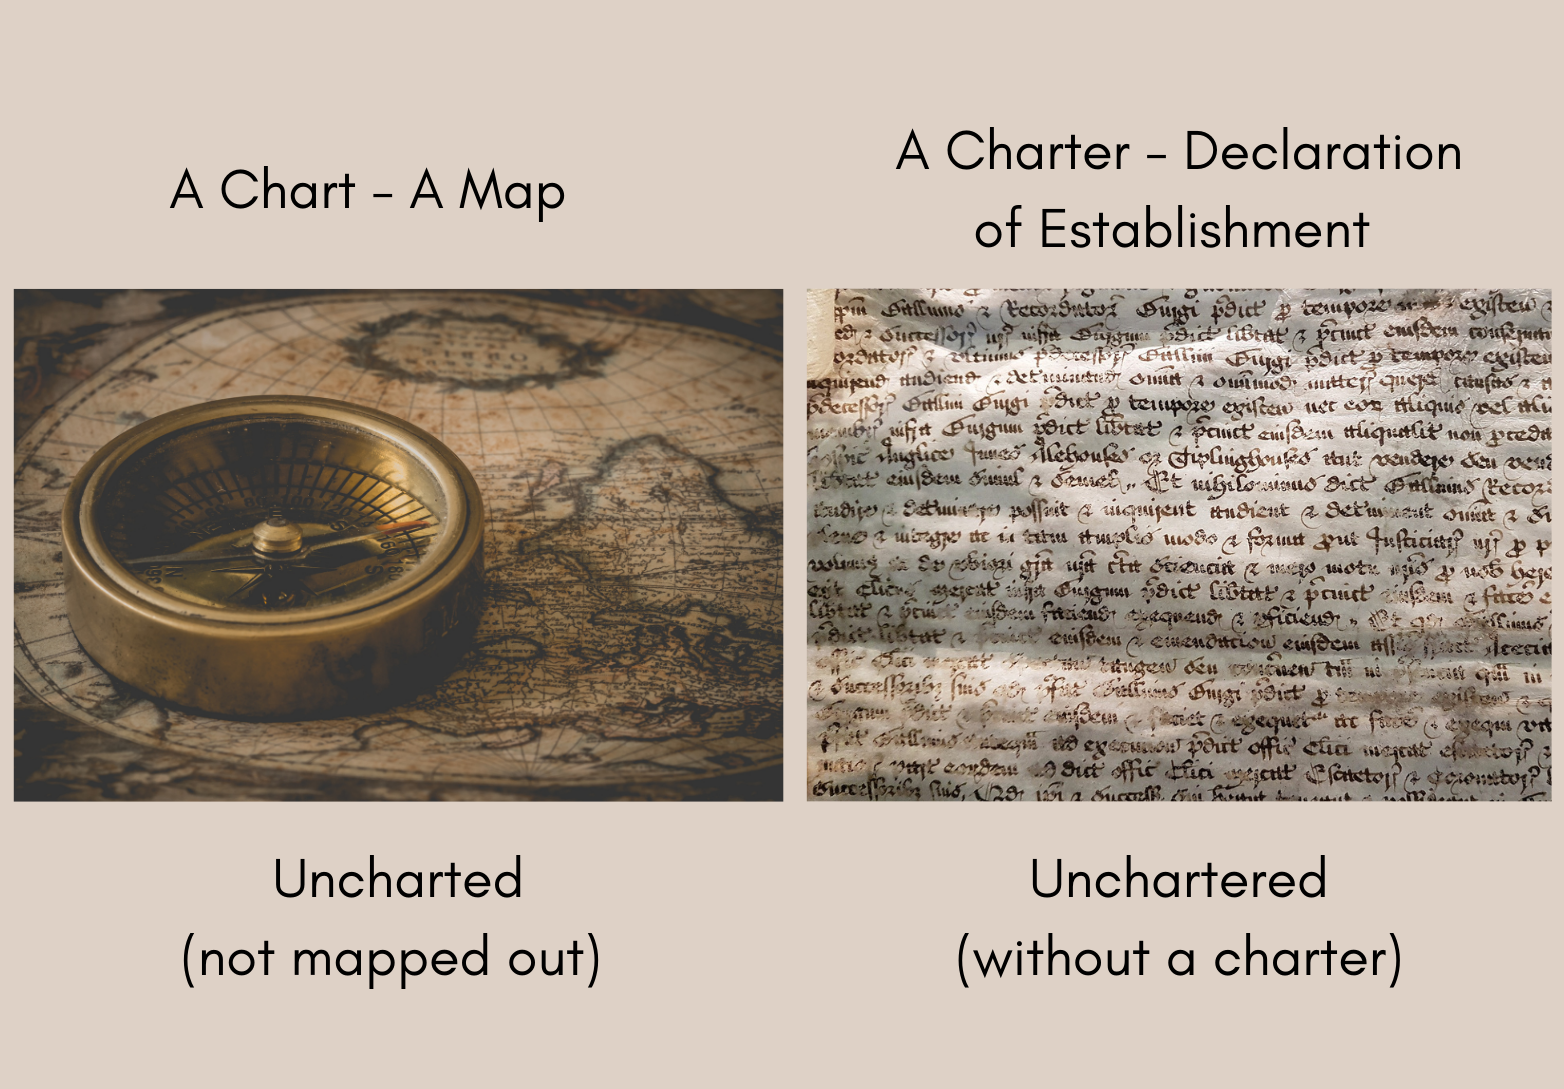 graphic showing uncharted vs. unchartered using an old map and an old charter